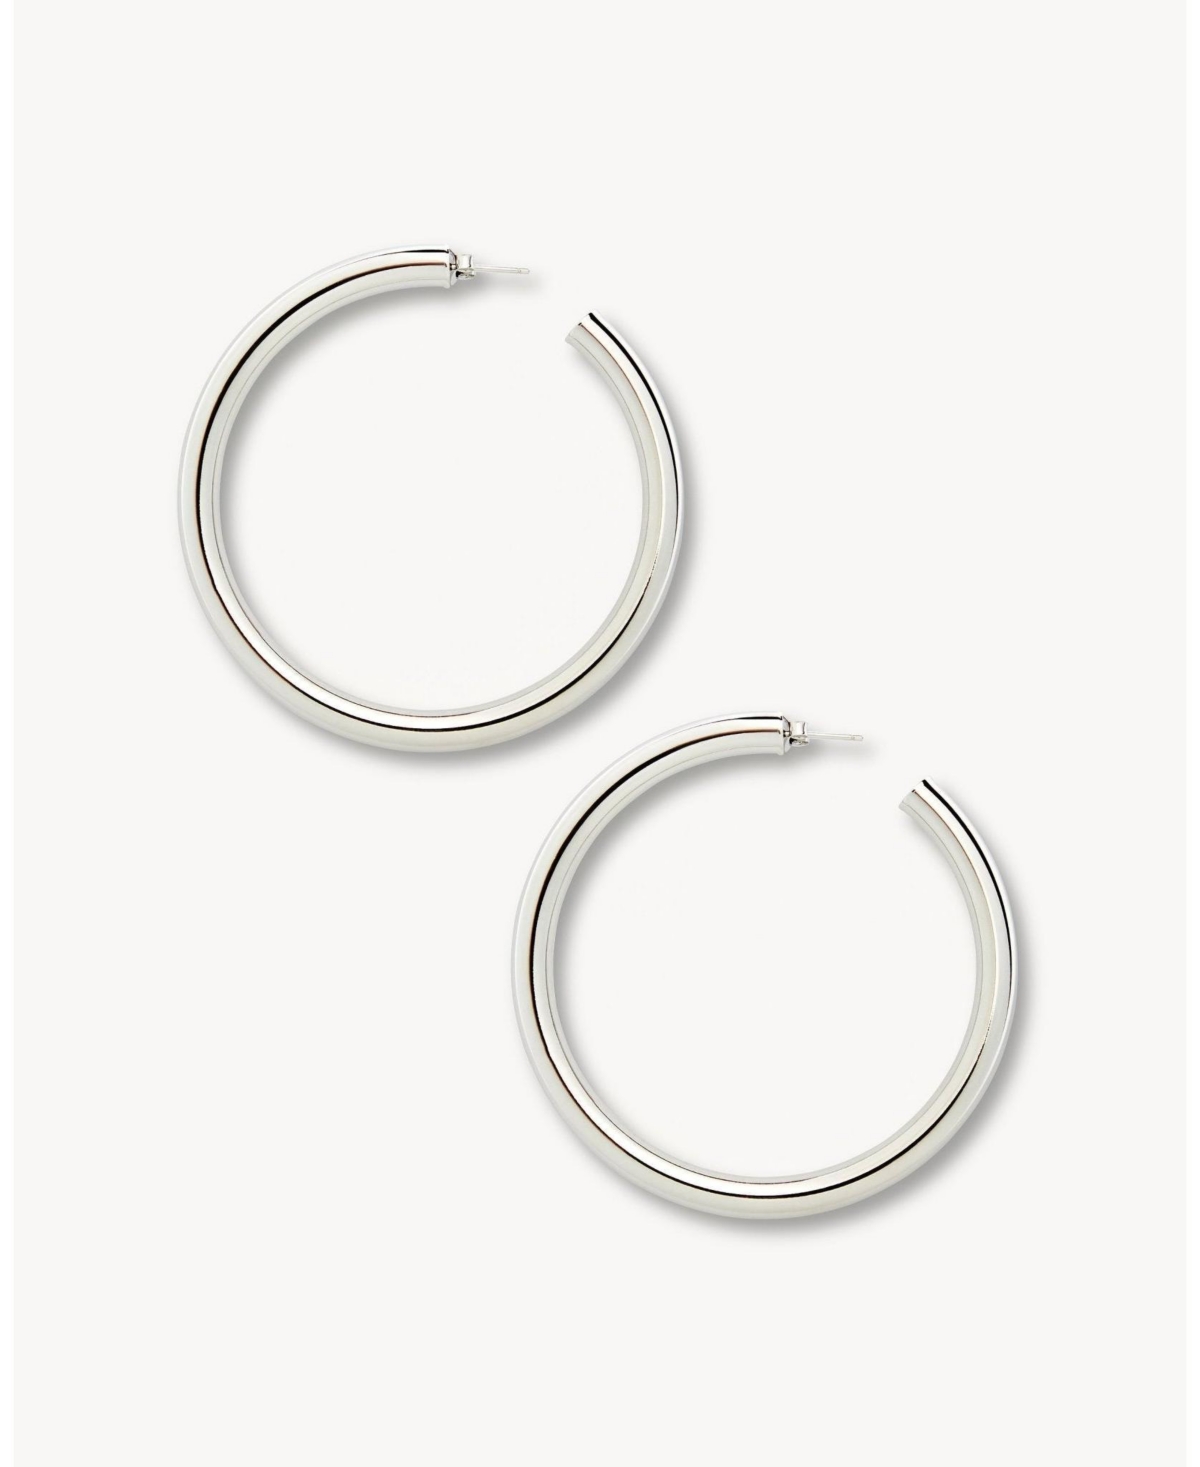 2.5" Perfect Hoops in Silver - Silver